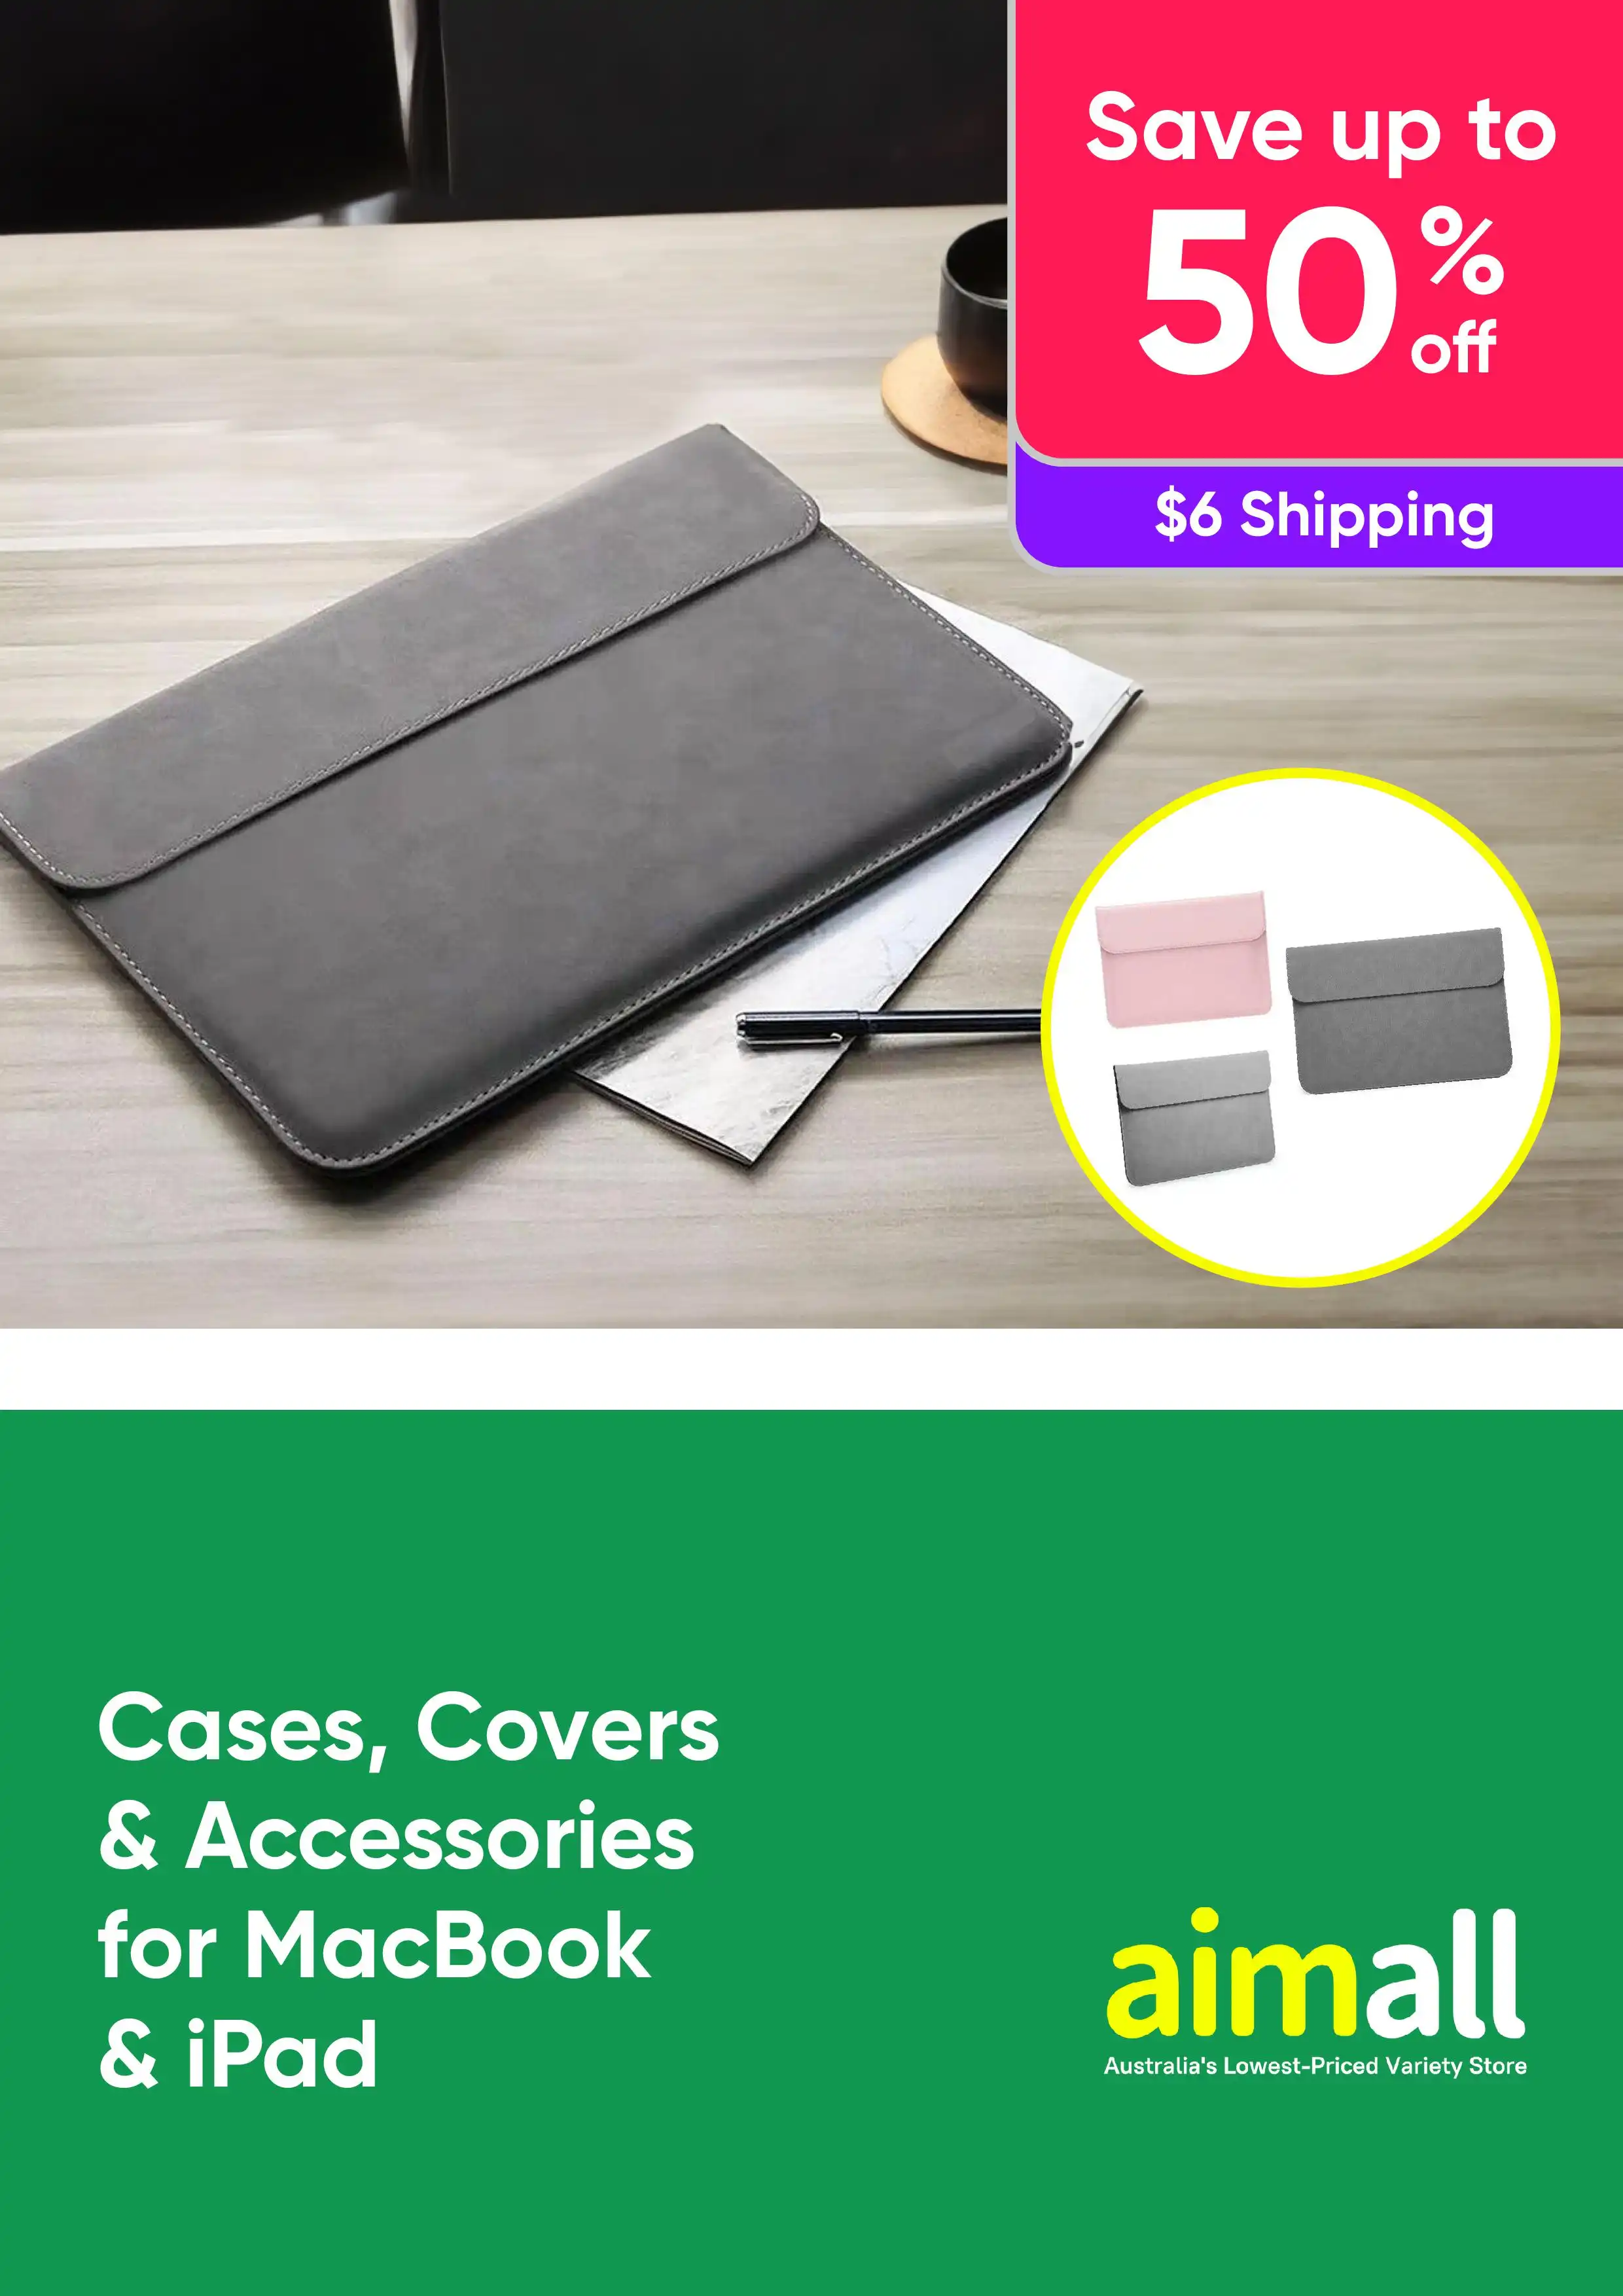 Up to 50% off cases, covers & accessories for MacBook & iPad